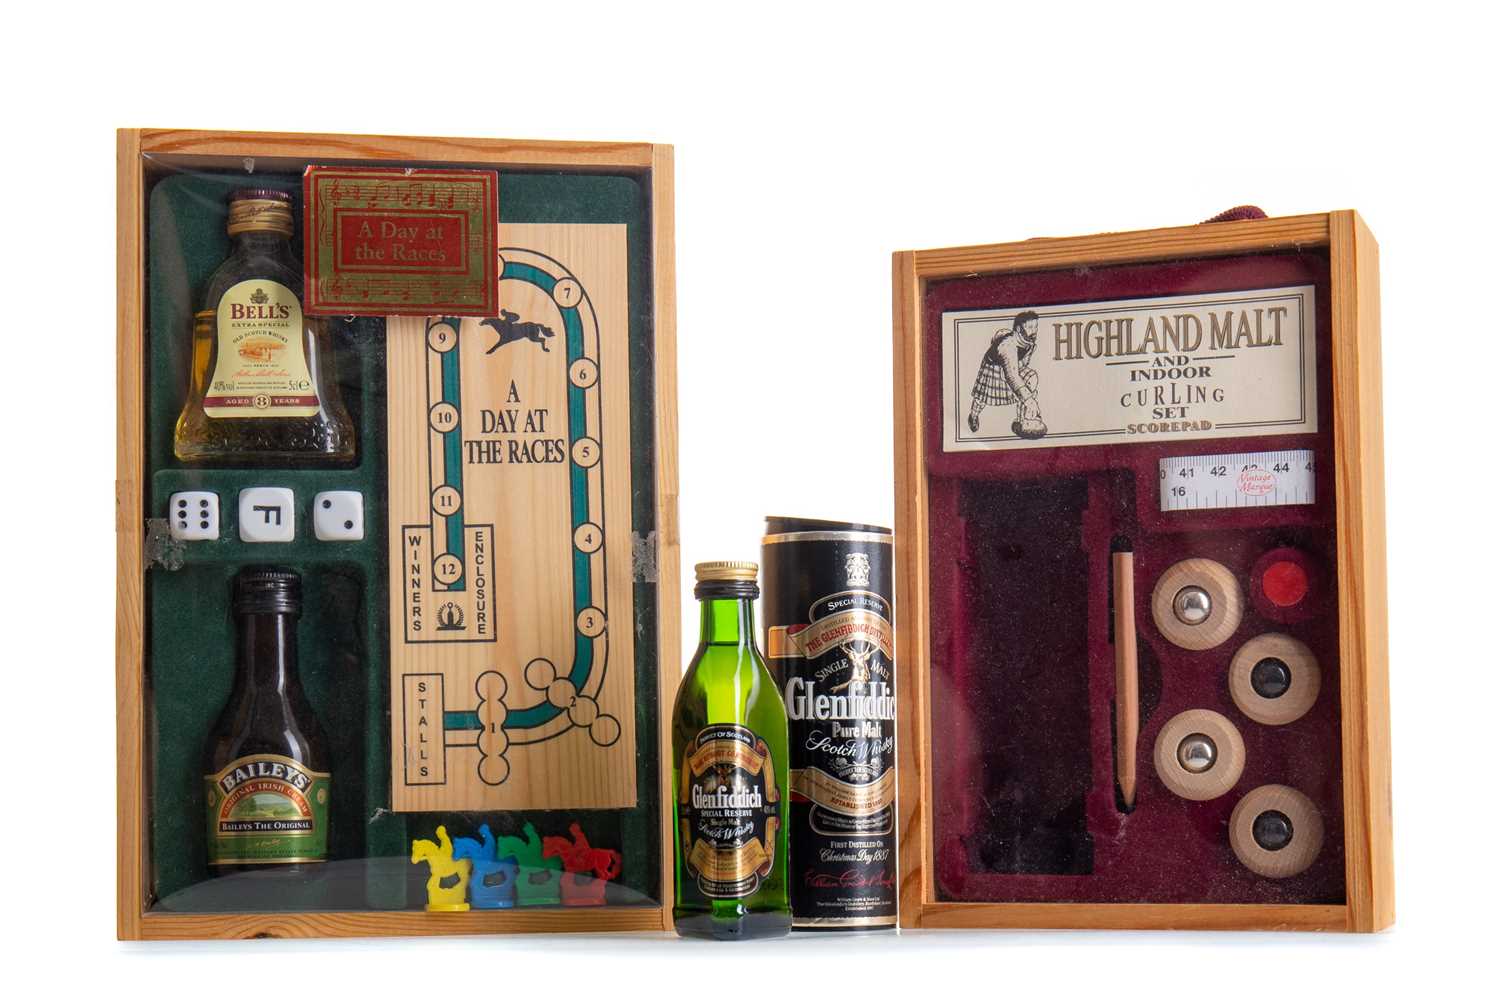 Lot 79 - GLENFIDDICH MINIATURE INDOOR CURLING SET AND "A DAY AT THE RACES" SET WITH BELL'S AND BAILEY'S MINIS